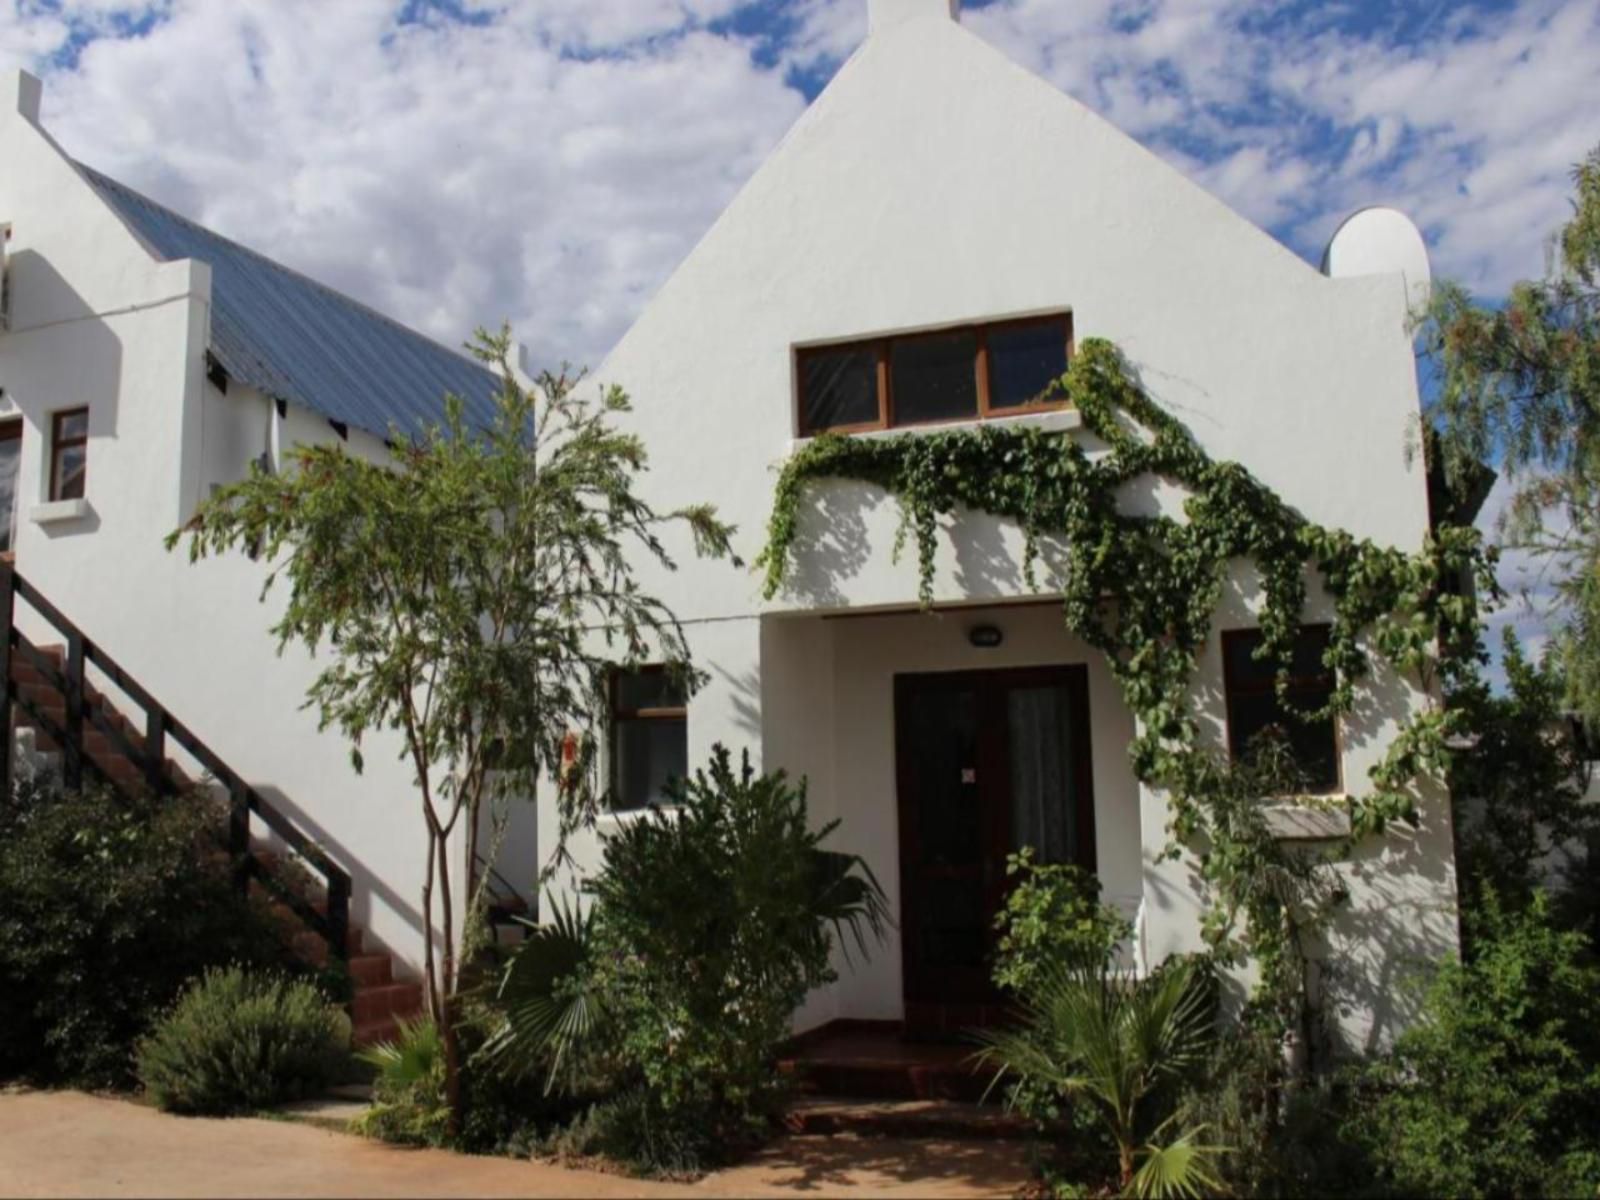 Geluksdam Guest House Olifantshoek Northern Cape South Africa Building, Architecture, House, Palm Tree, Plant, Nature, Wood